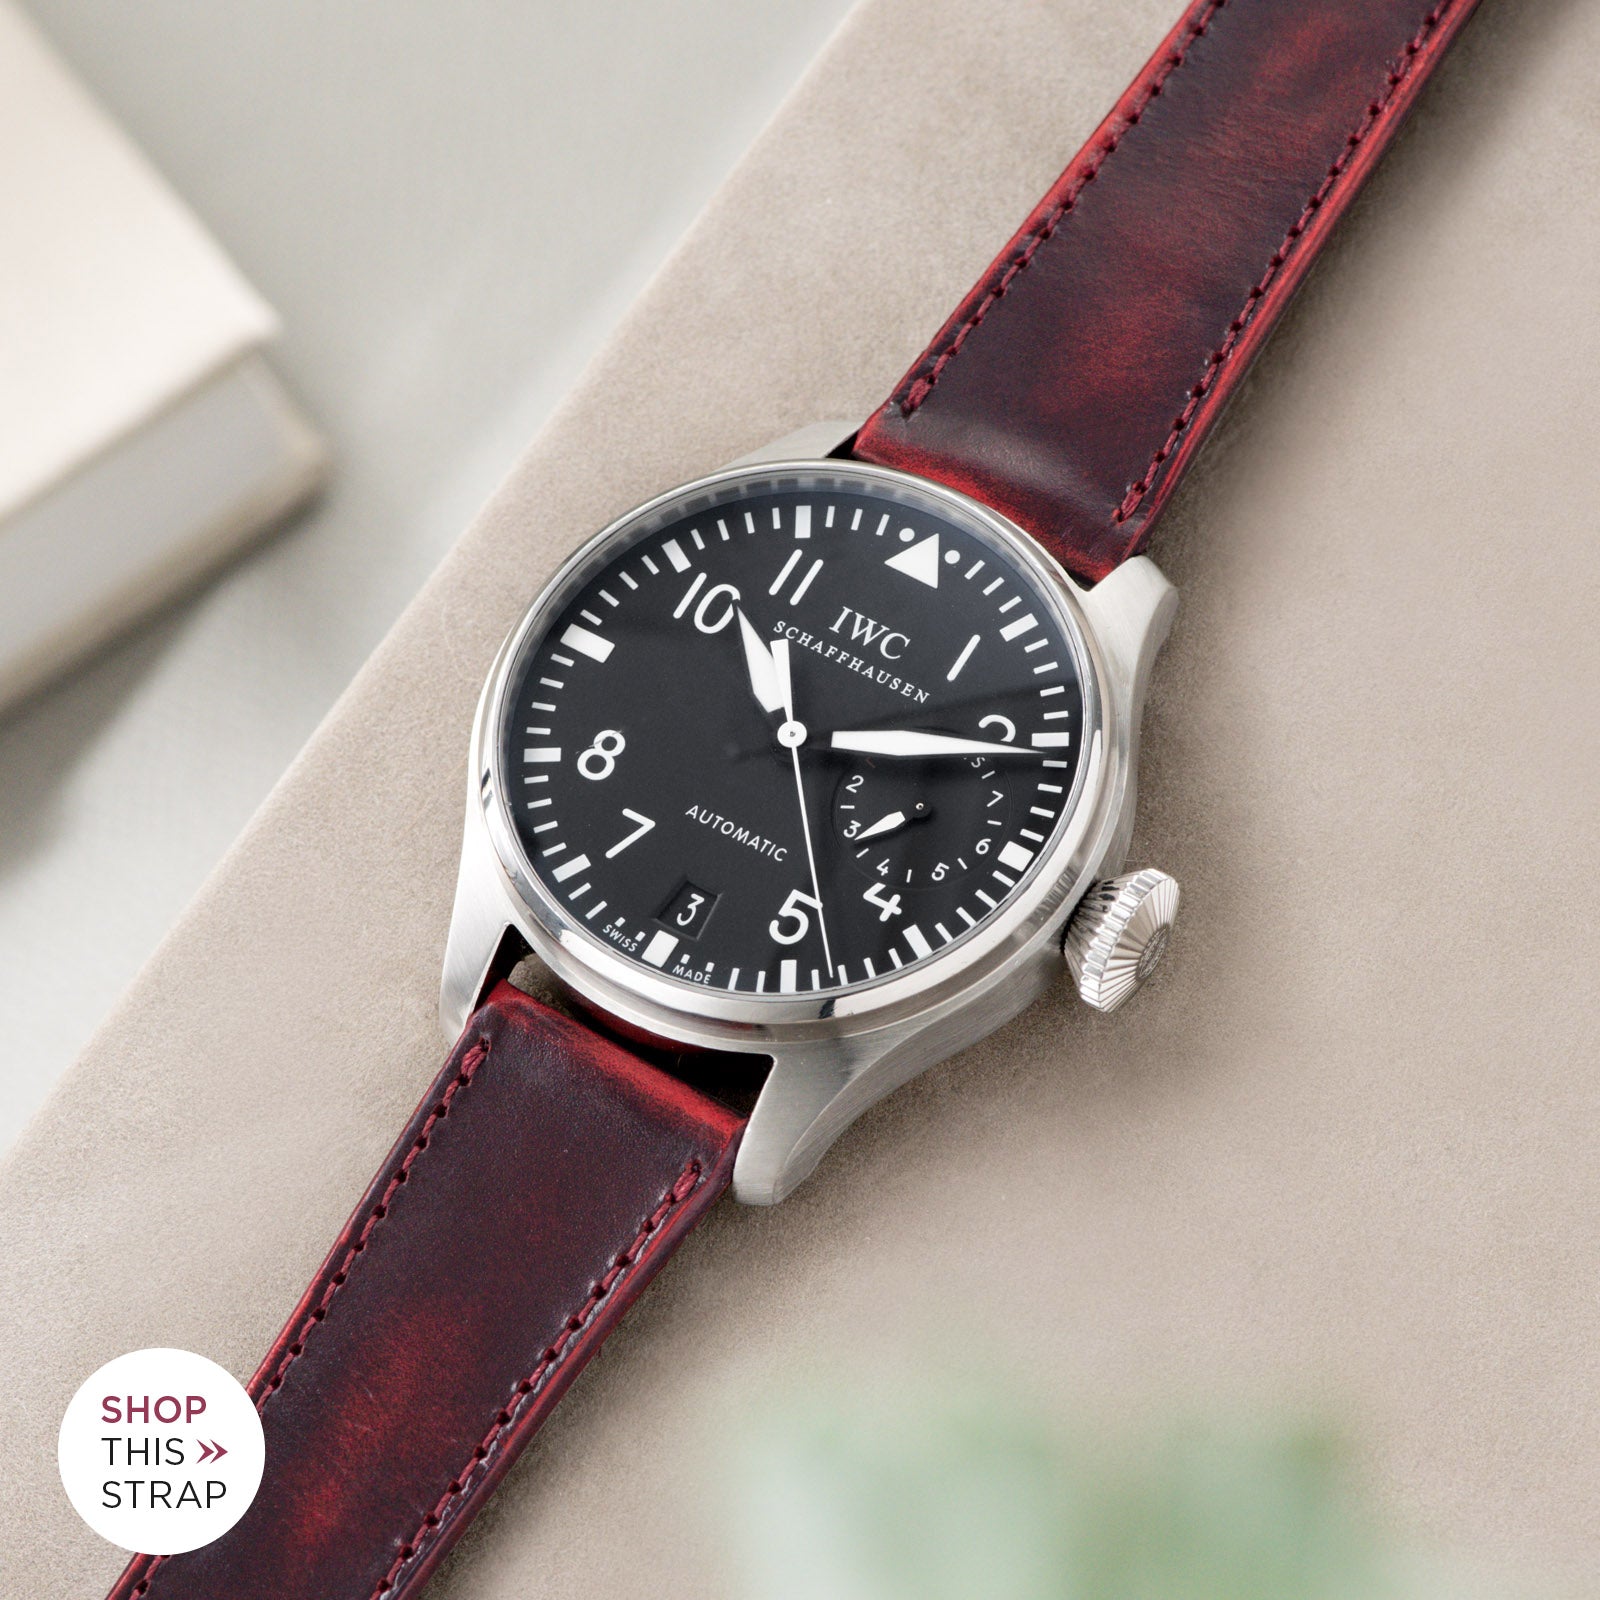 Bulang and Sons_Strap Guide_IWC Big Pilot Ref 5004_Degrade Chili Red Leather Watch Strap